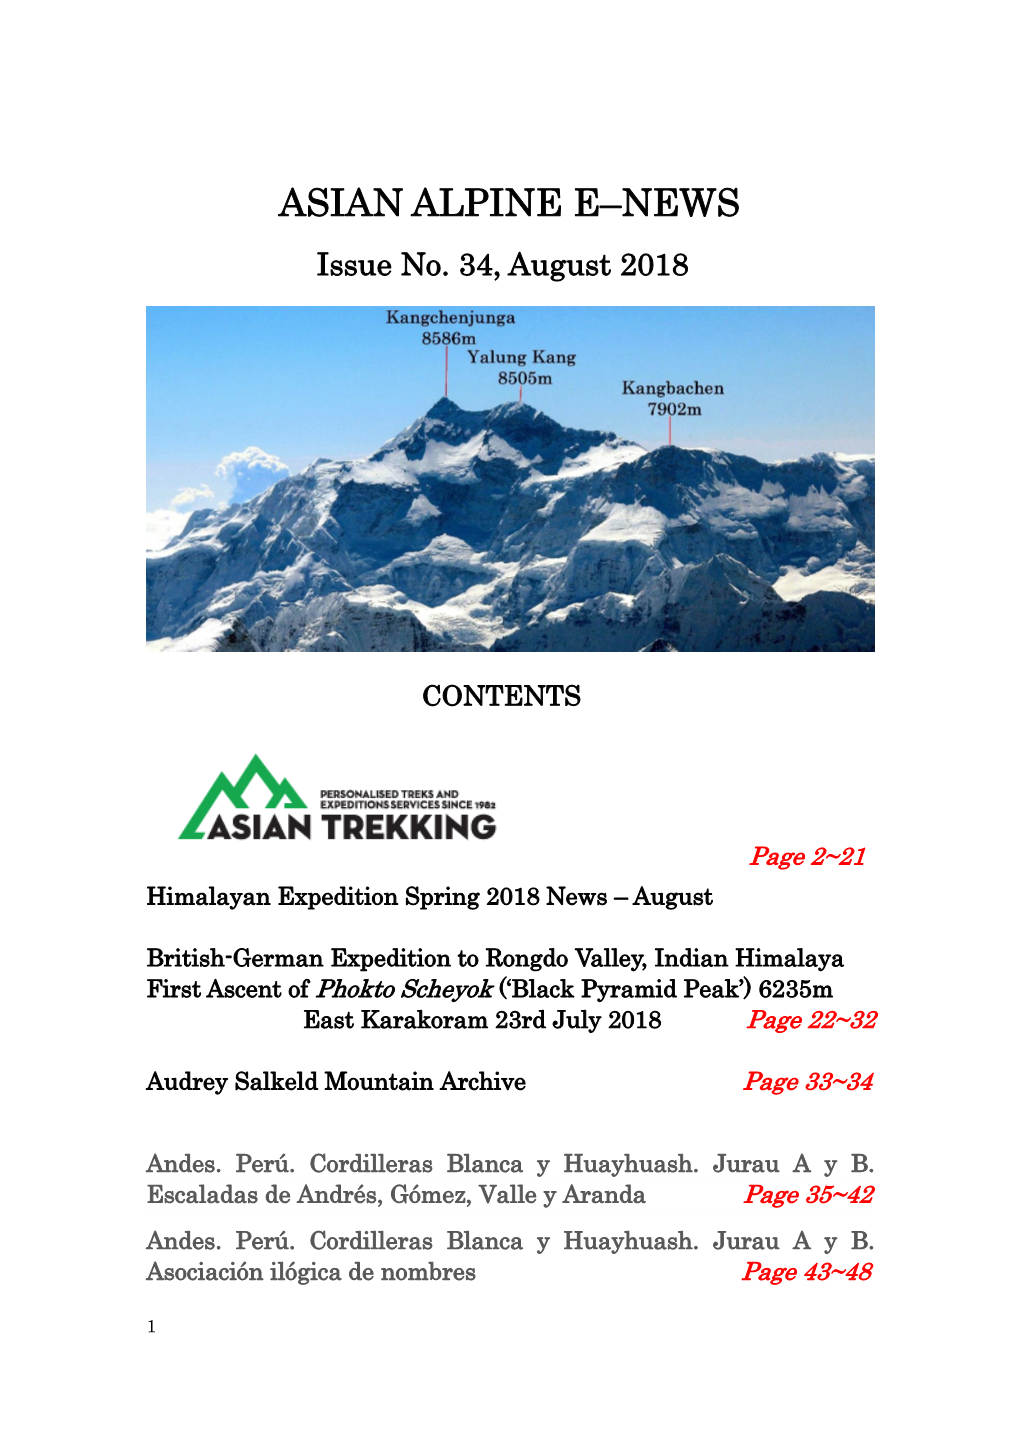 Asian Trekking's Mt. Everest Expedition: Eco Everest Expedition 2018